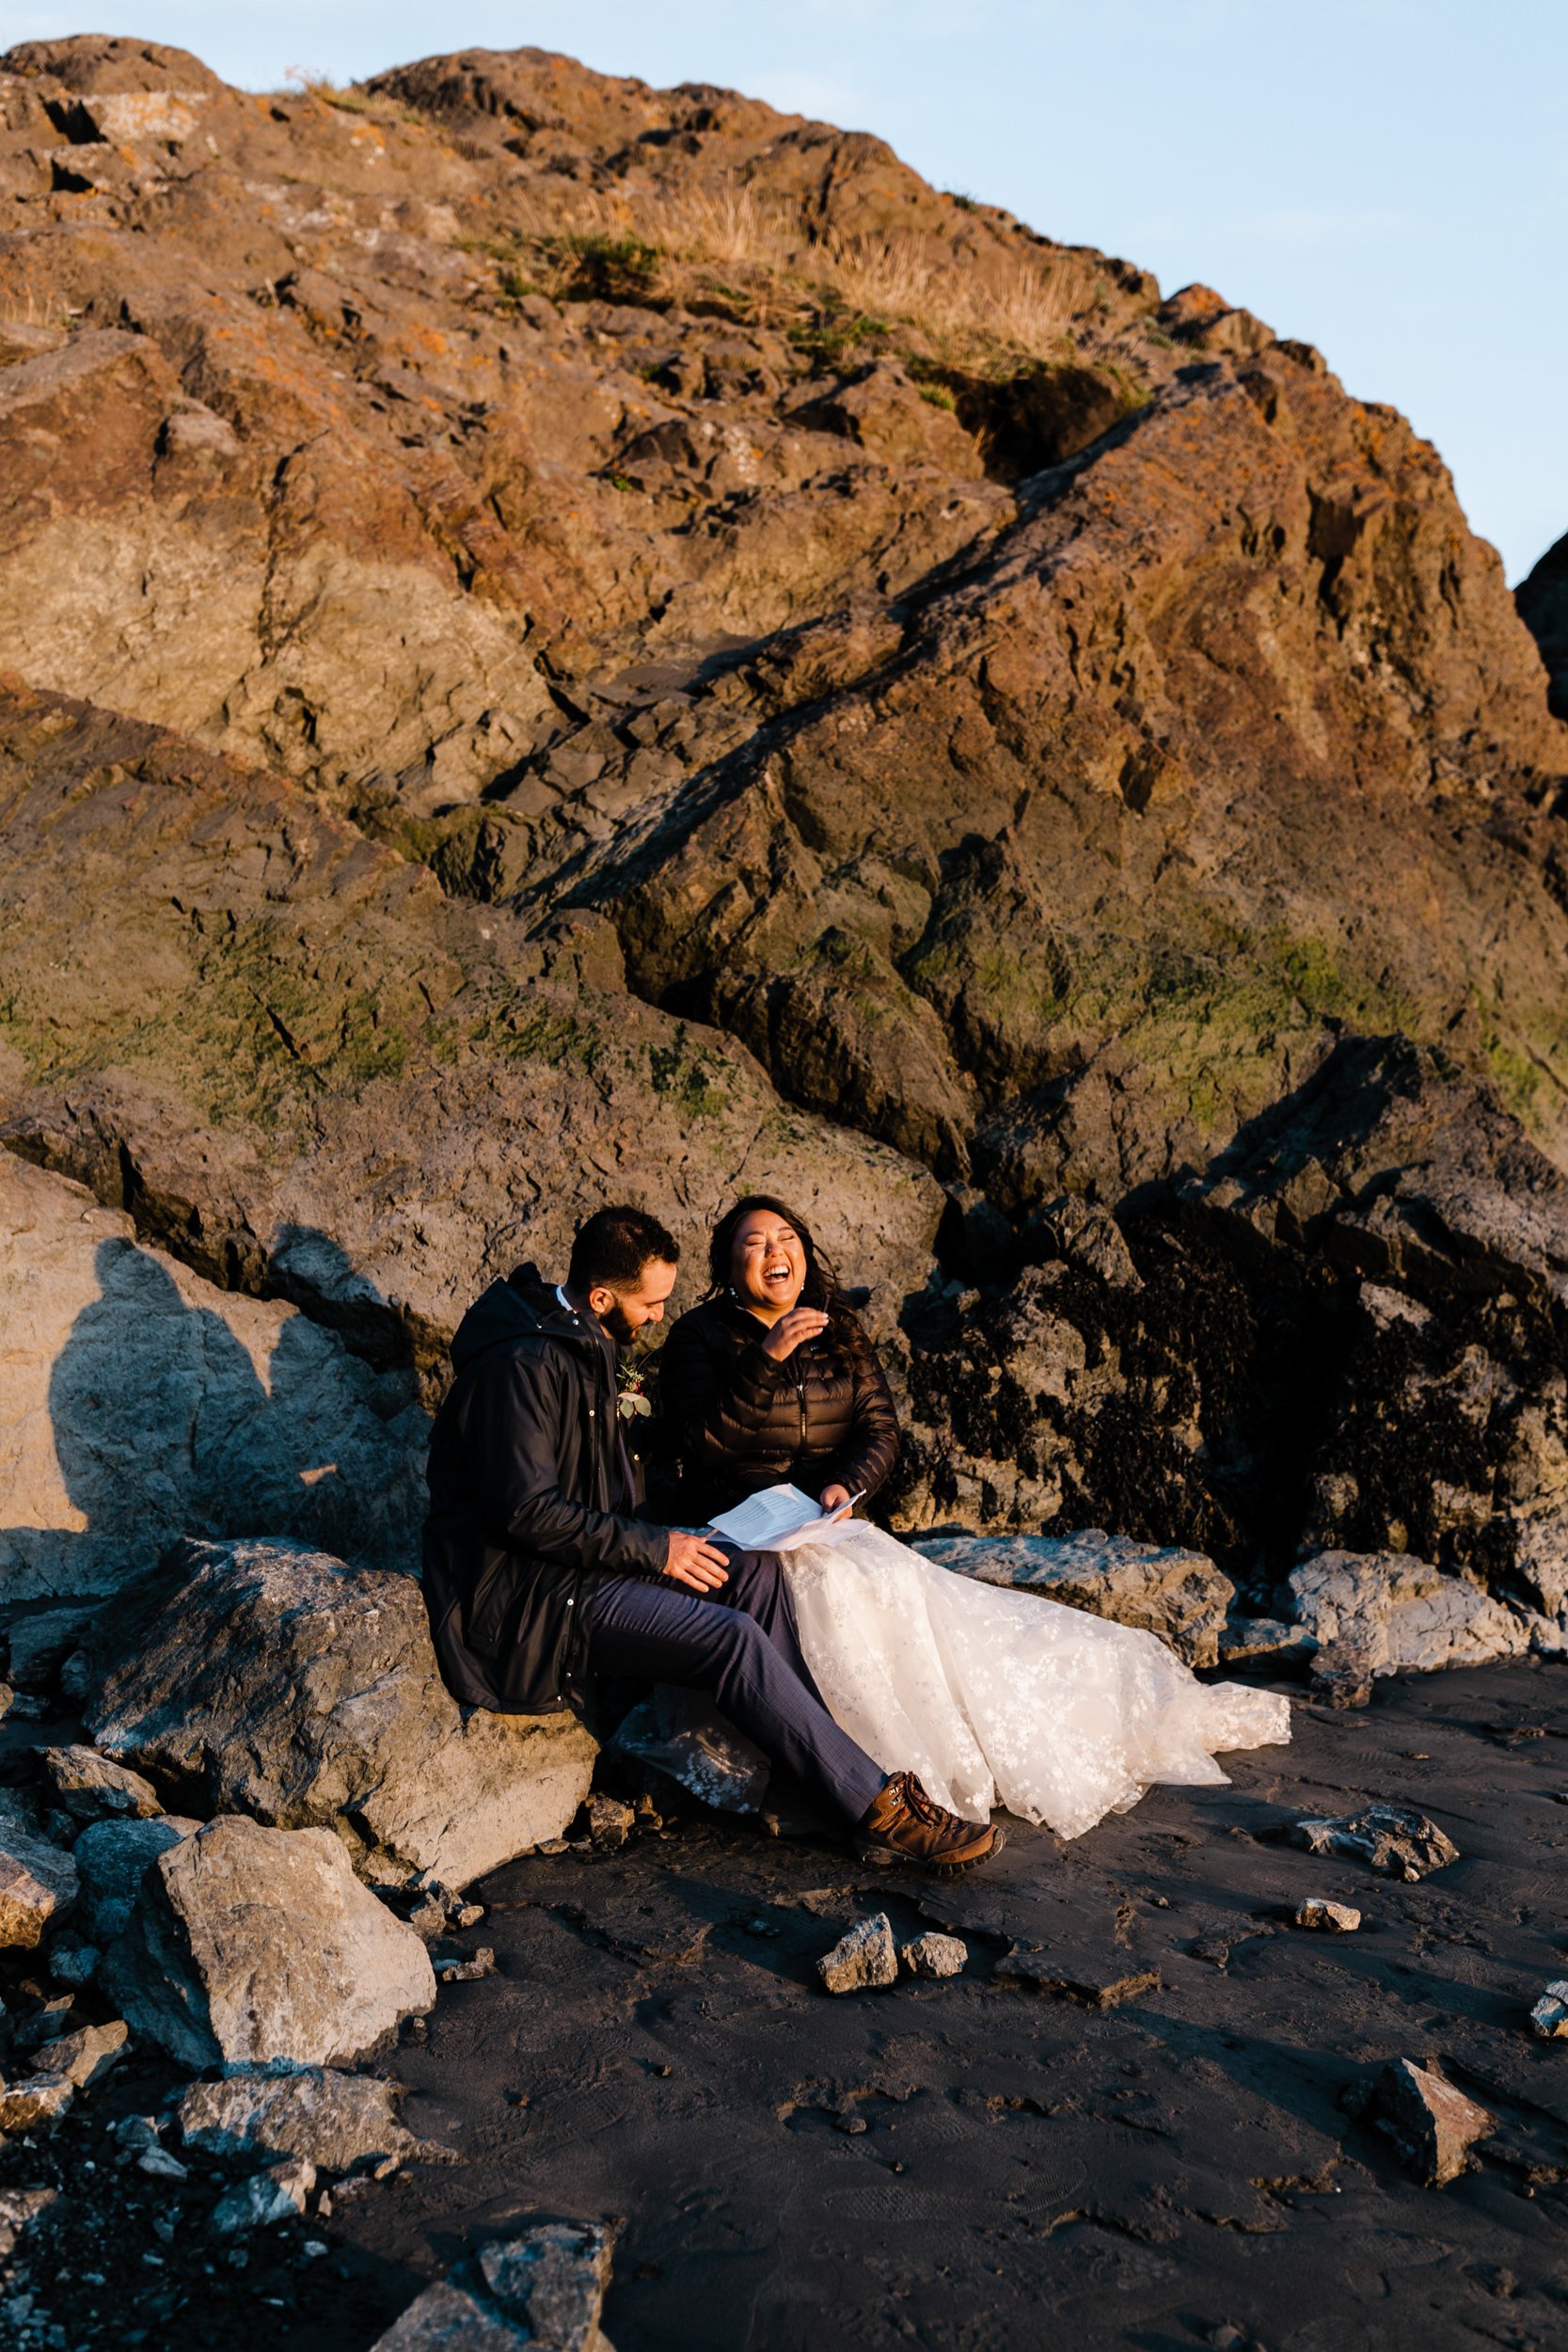 Helicopter Adventure Wedding in the Mountains in Alaska | The Hearnes Elopement Photography